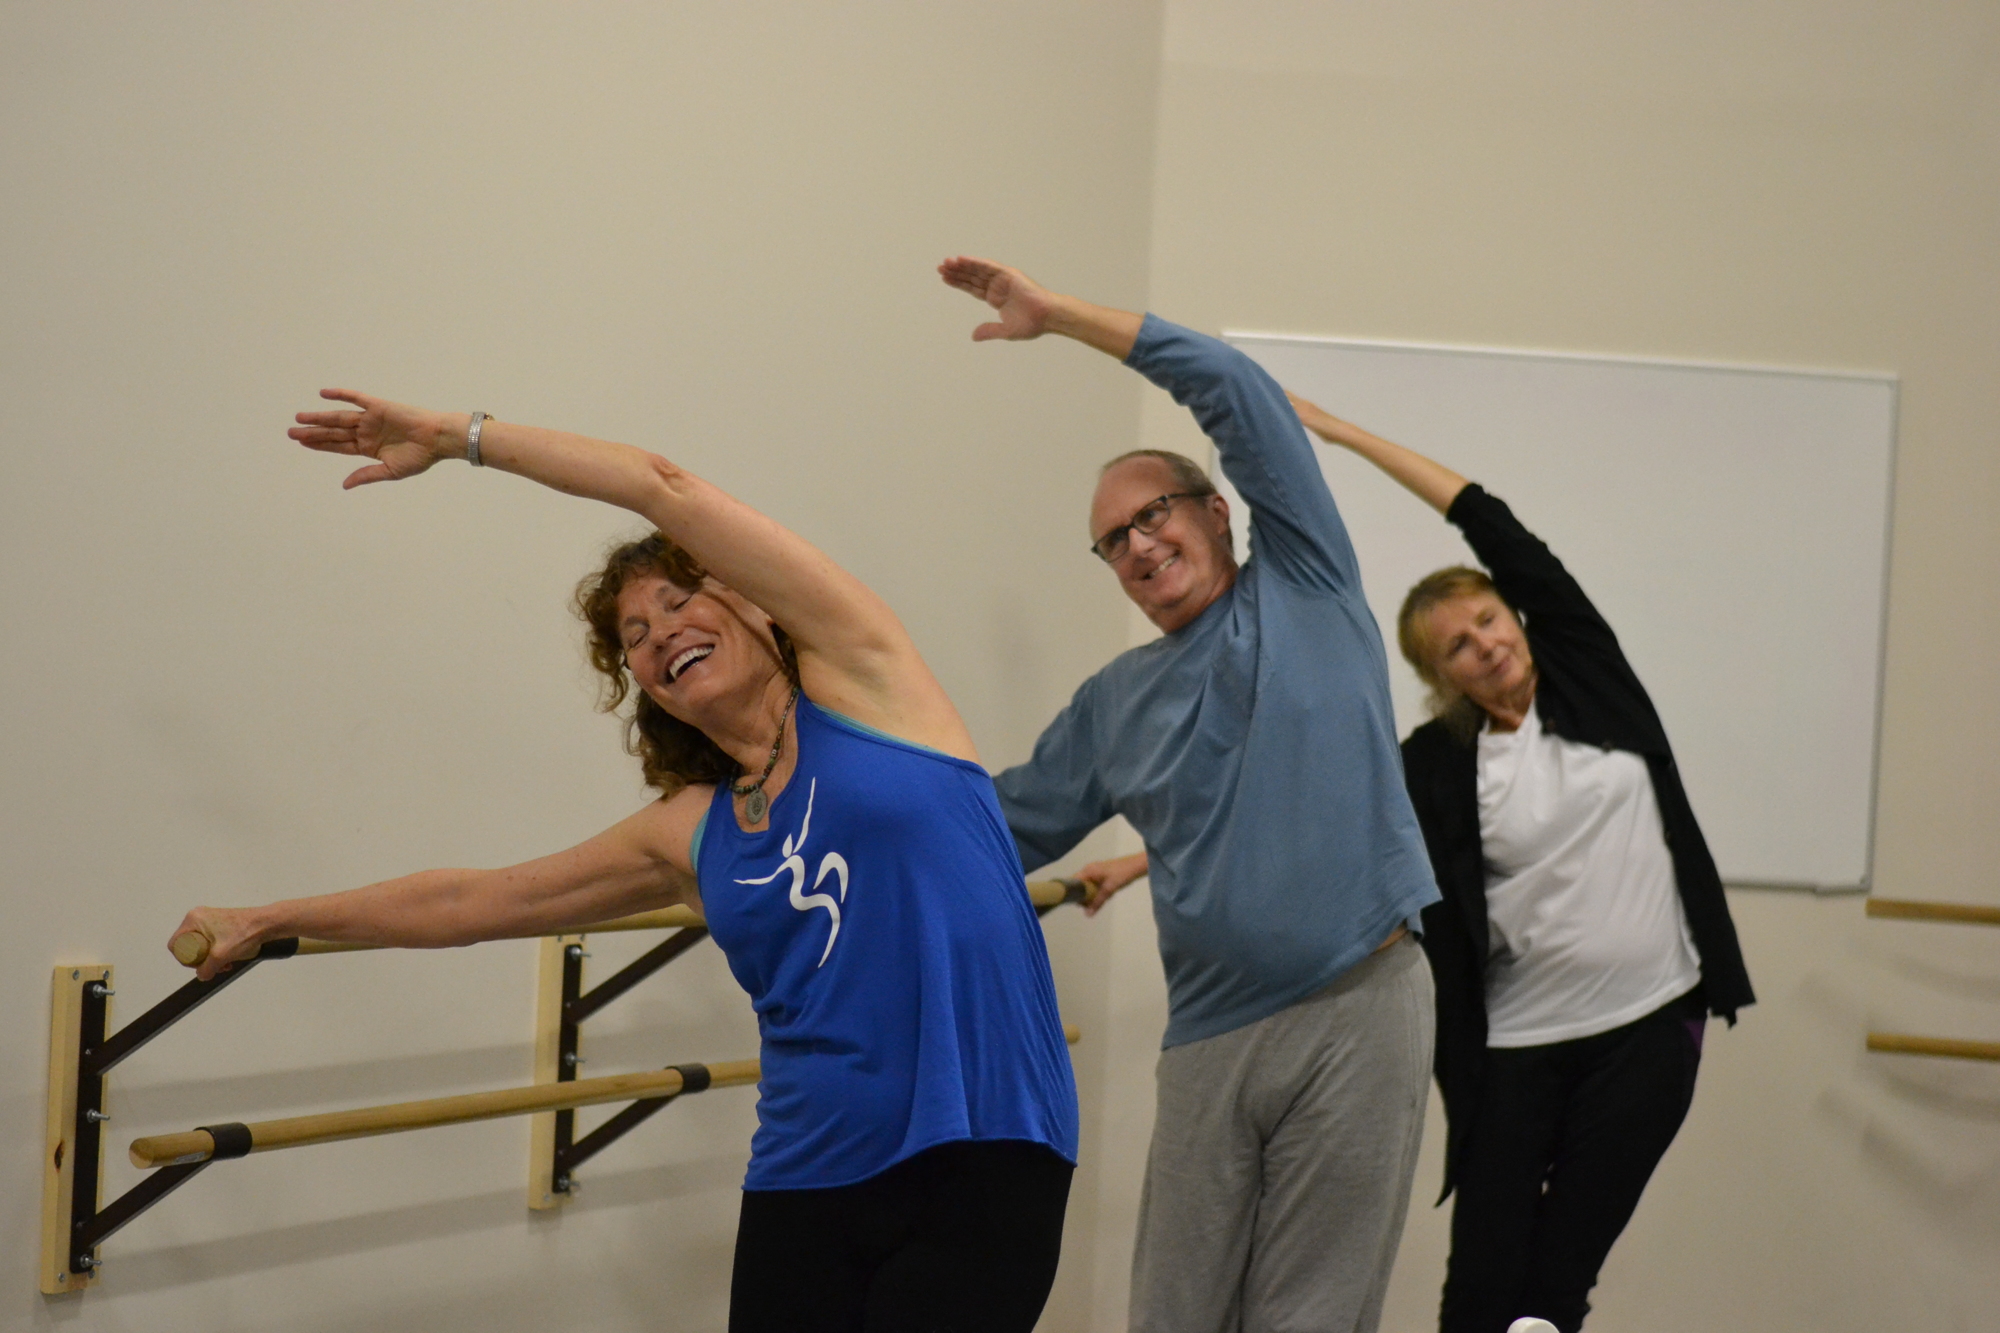 Megha-Nancy Buttenheim leads the Let Your Yoga Dance class at the barre through stretches.